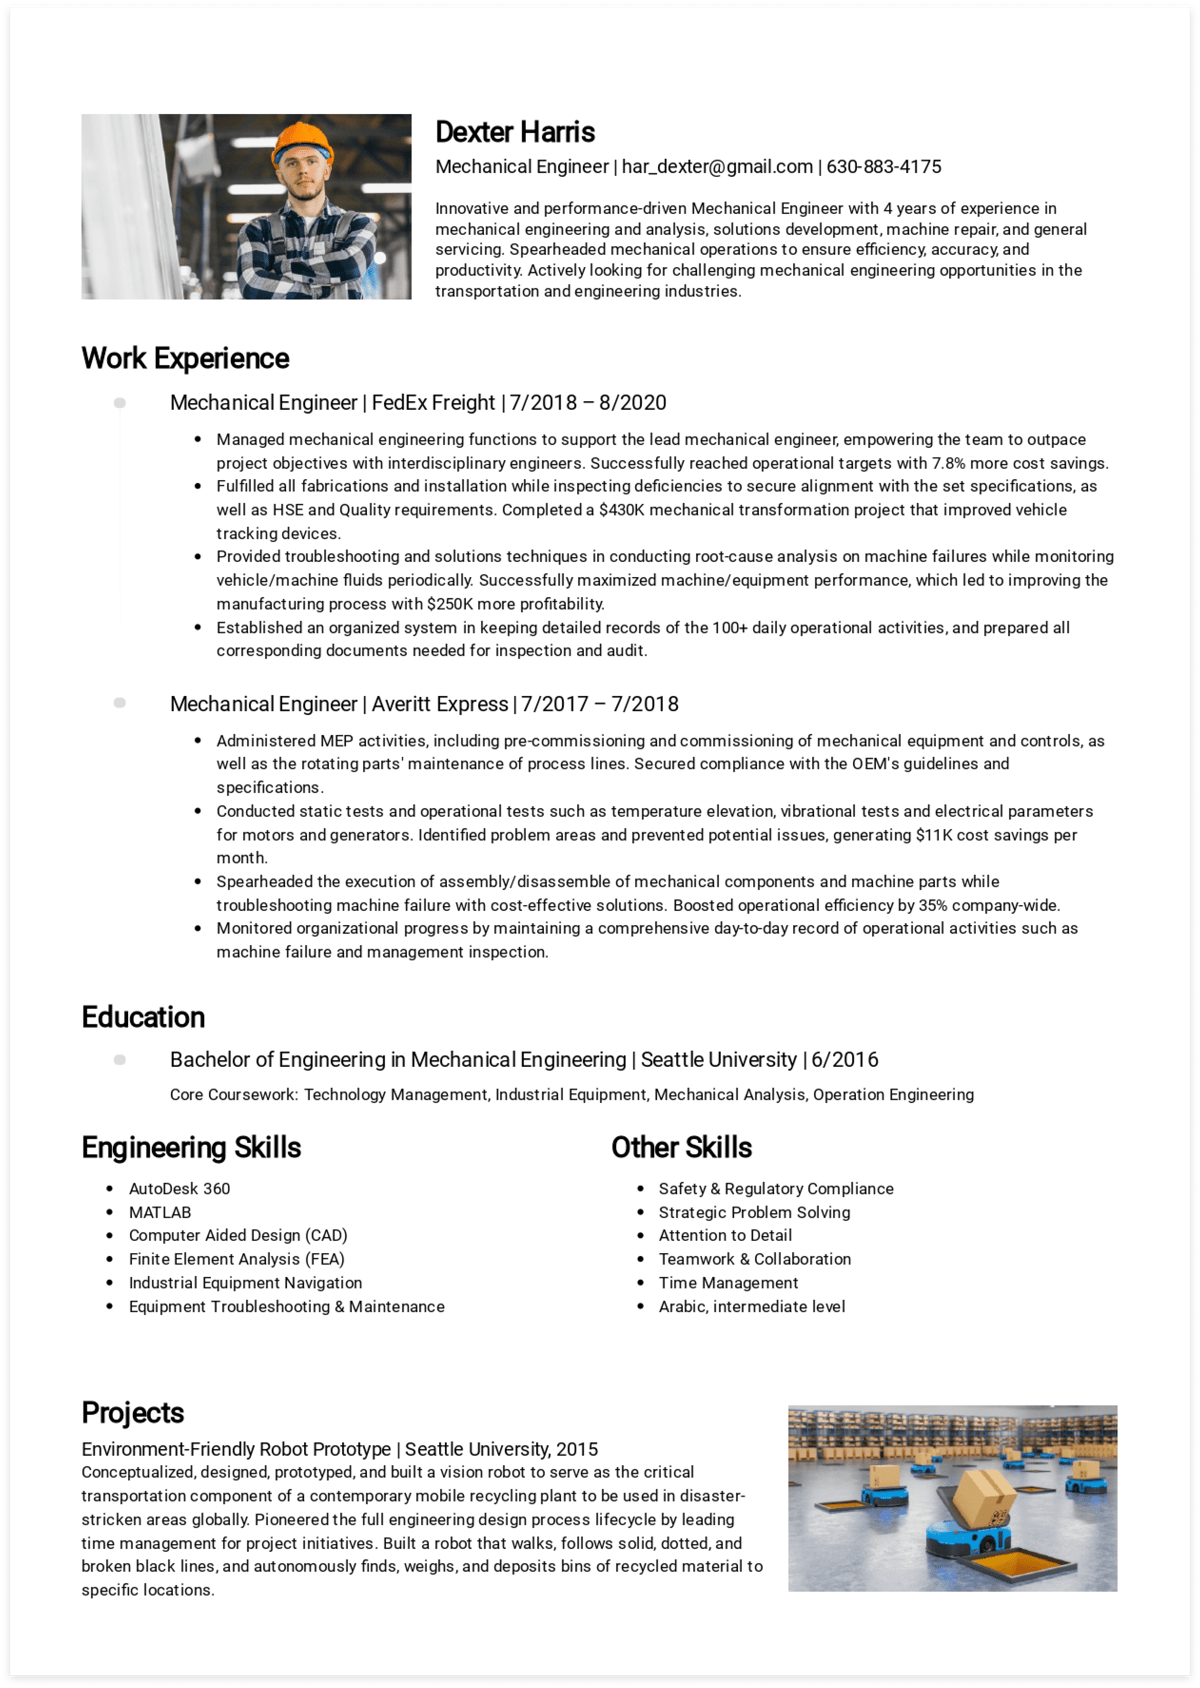 Generated via CakeResume. Click to download Dexter's Mechanical Engineer resume in pdf!